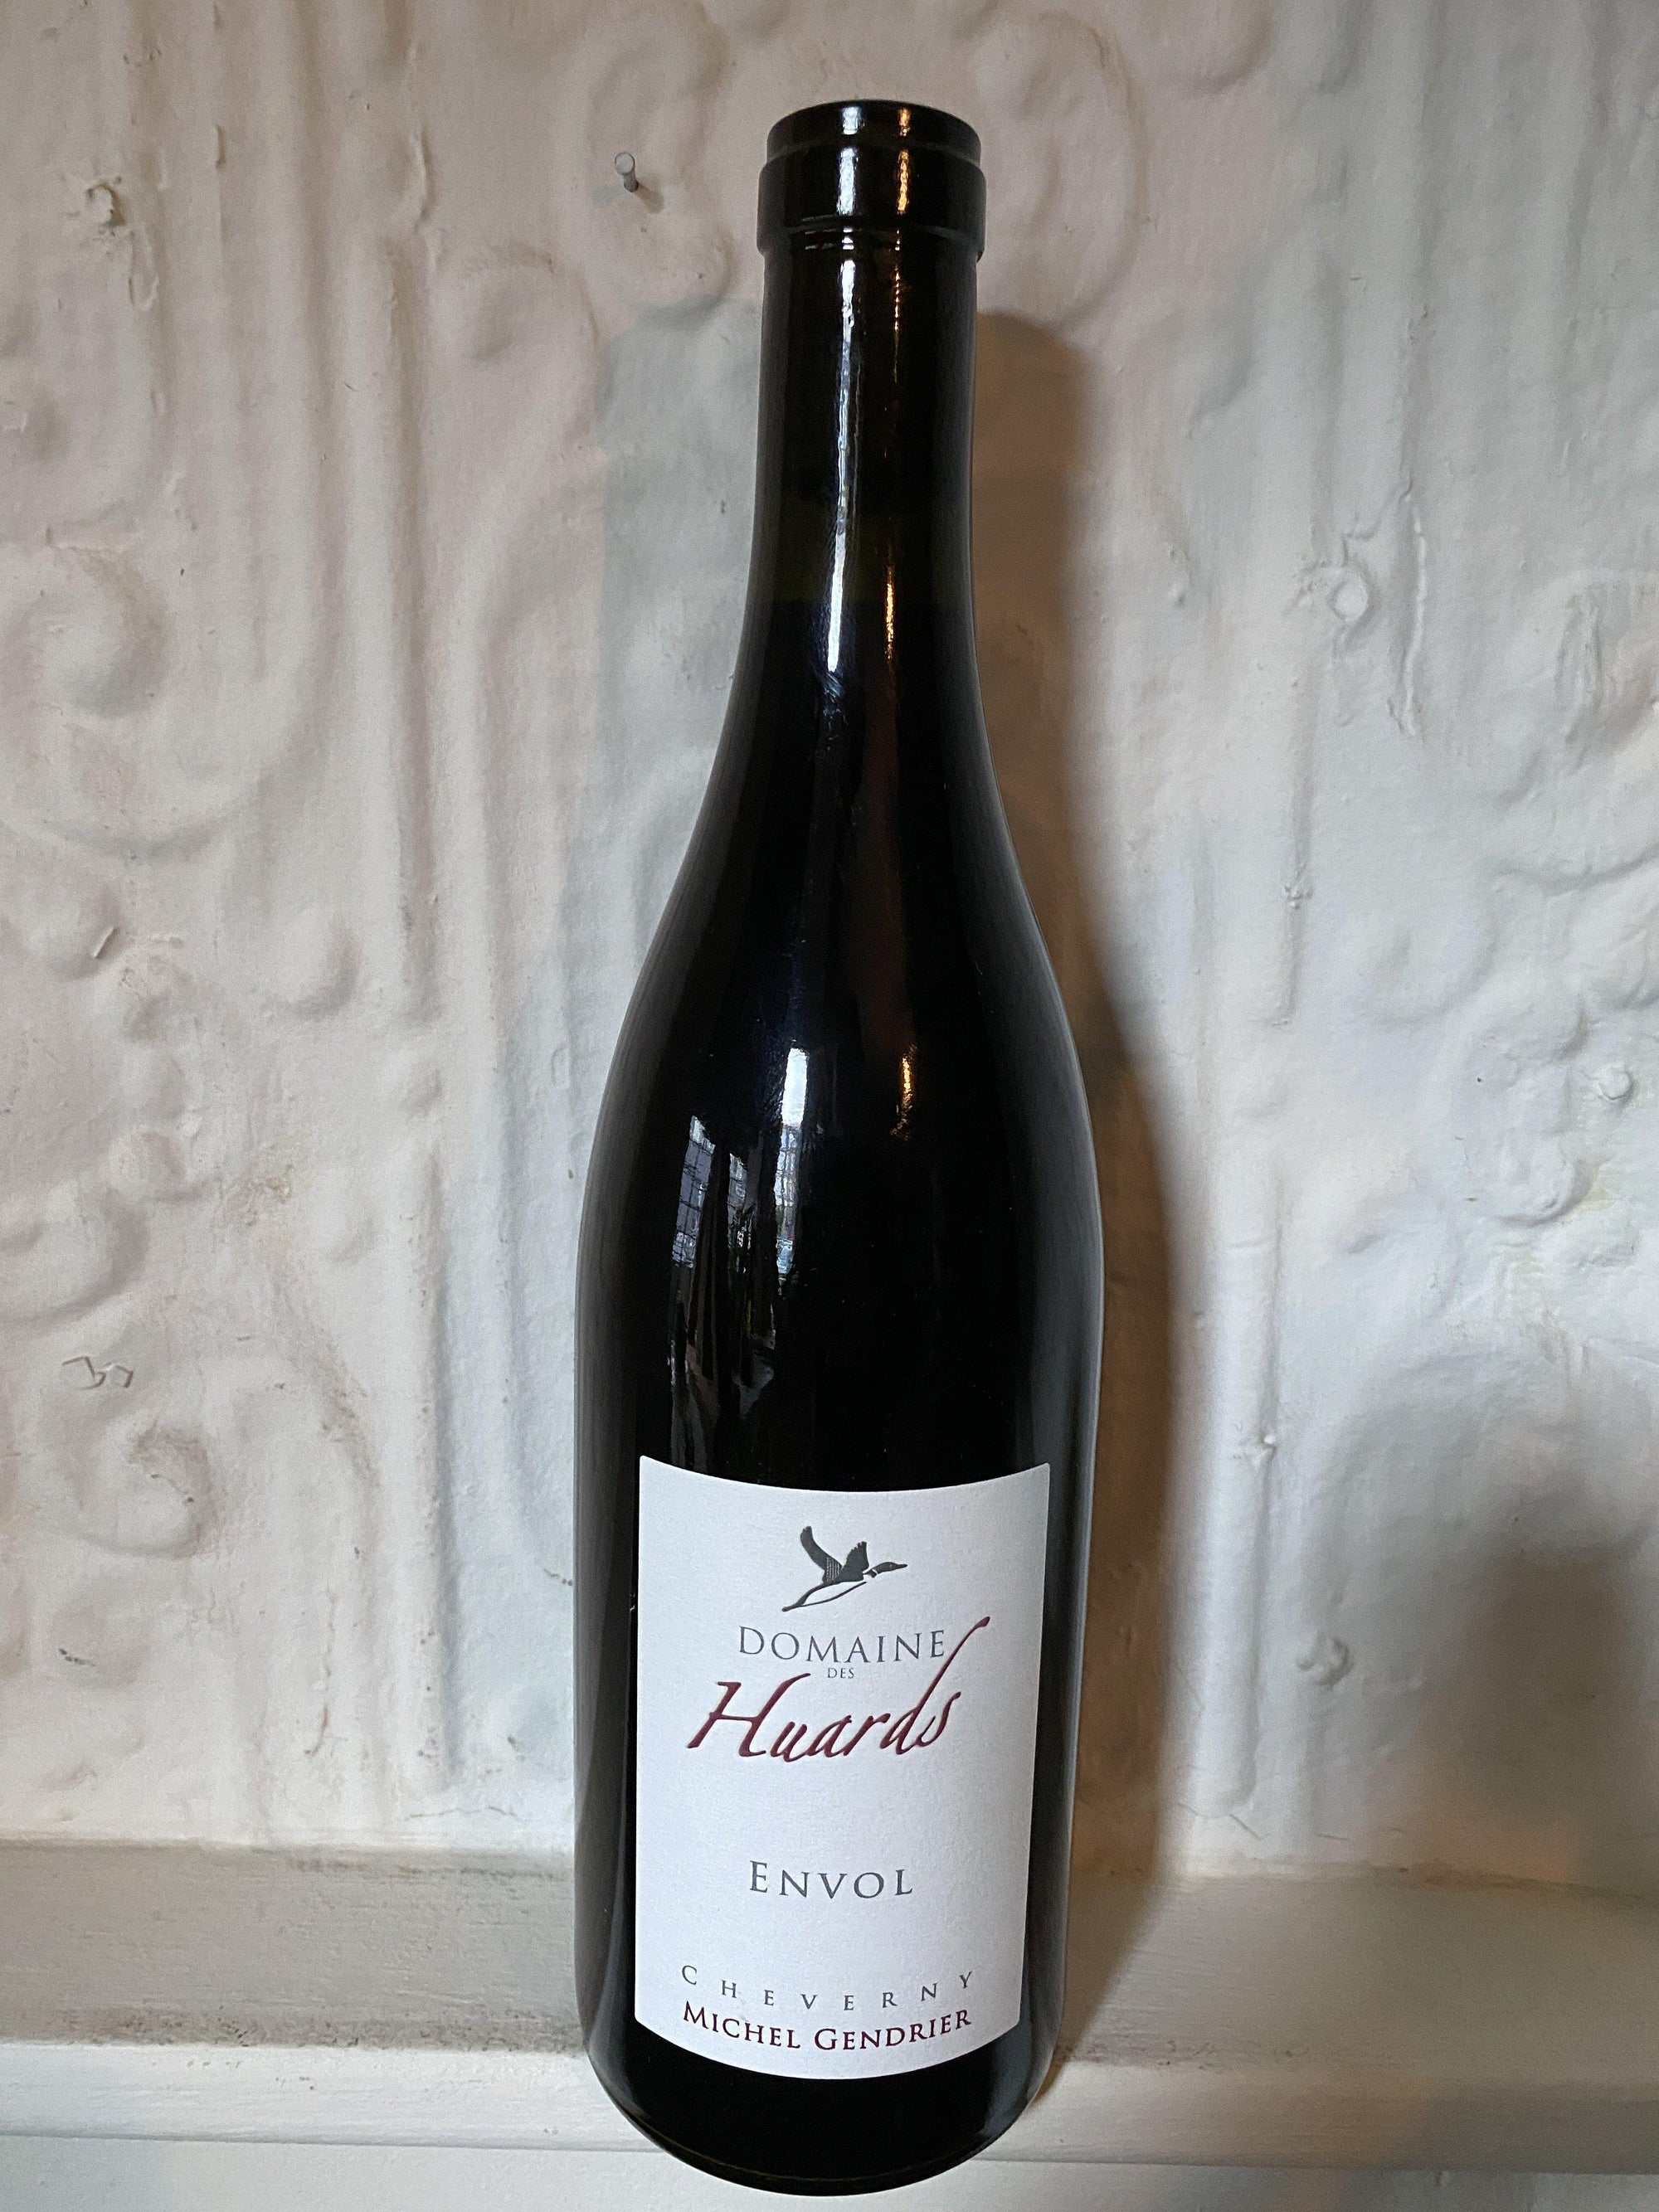 Cheverny Rouge "Envol" Domaine Huards 2017 (Loire Valley, France)-Wine-Bibber & Bell